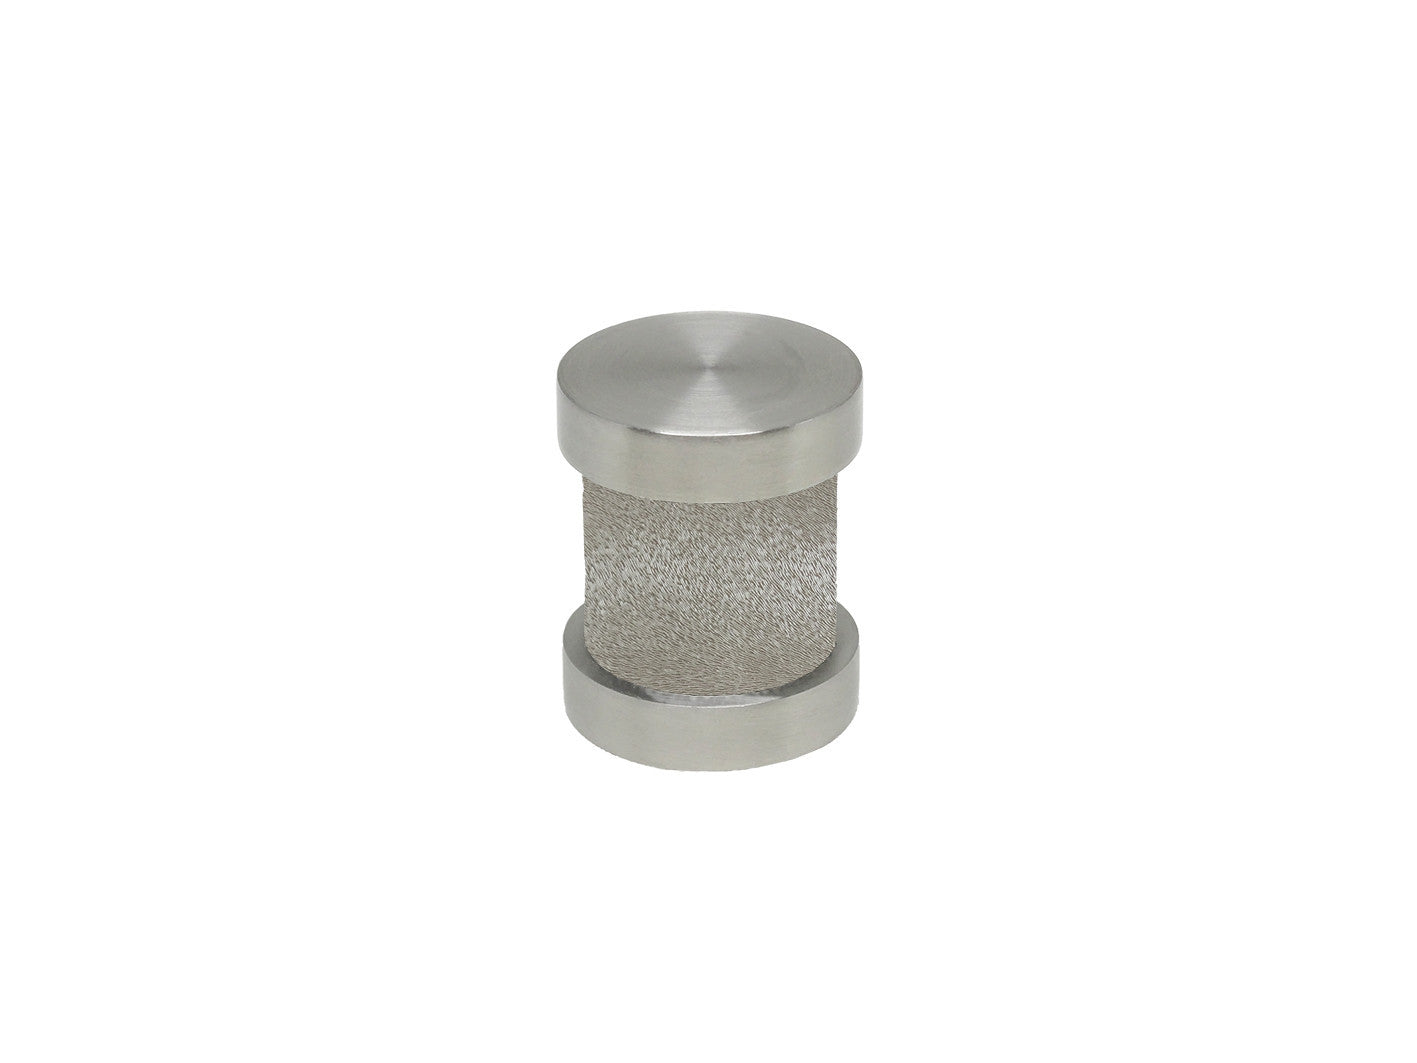 Shadow grey groove finial | Walcot House 30mm stainless steel collection